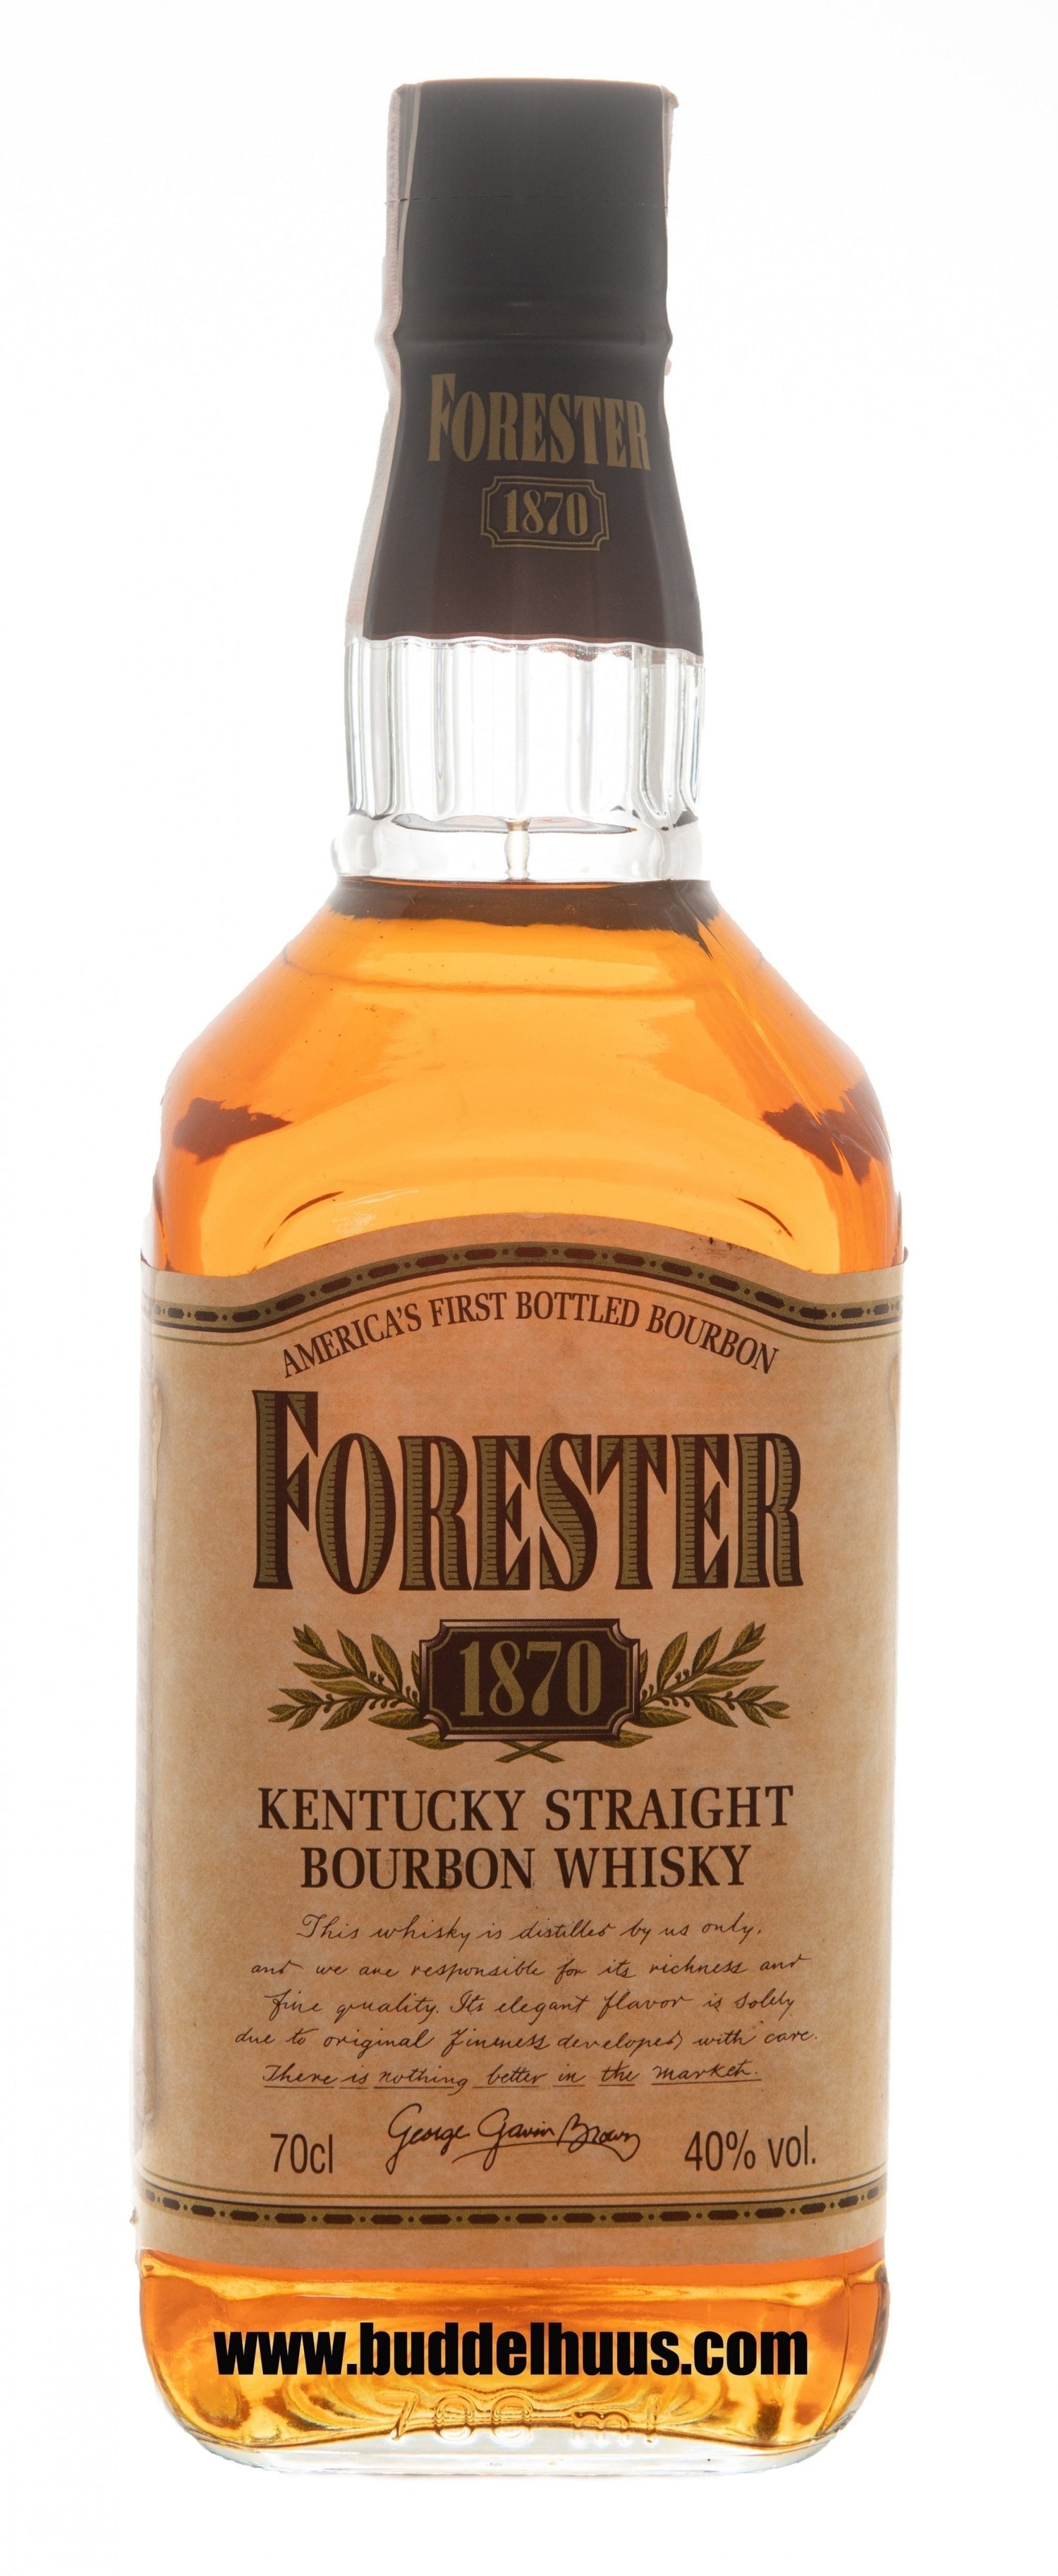 Forester 1870 (1990s Release)